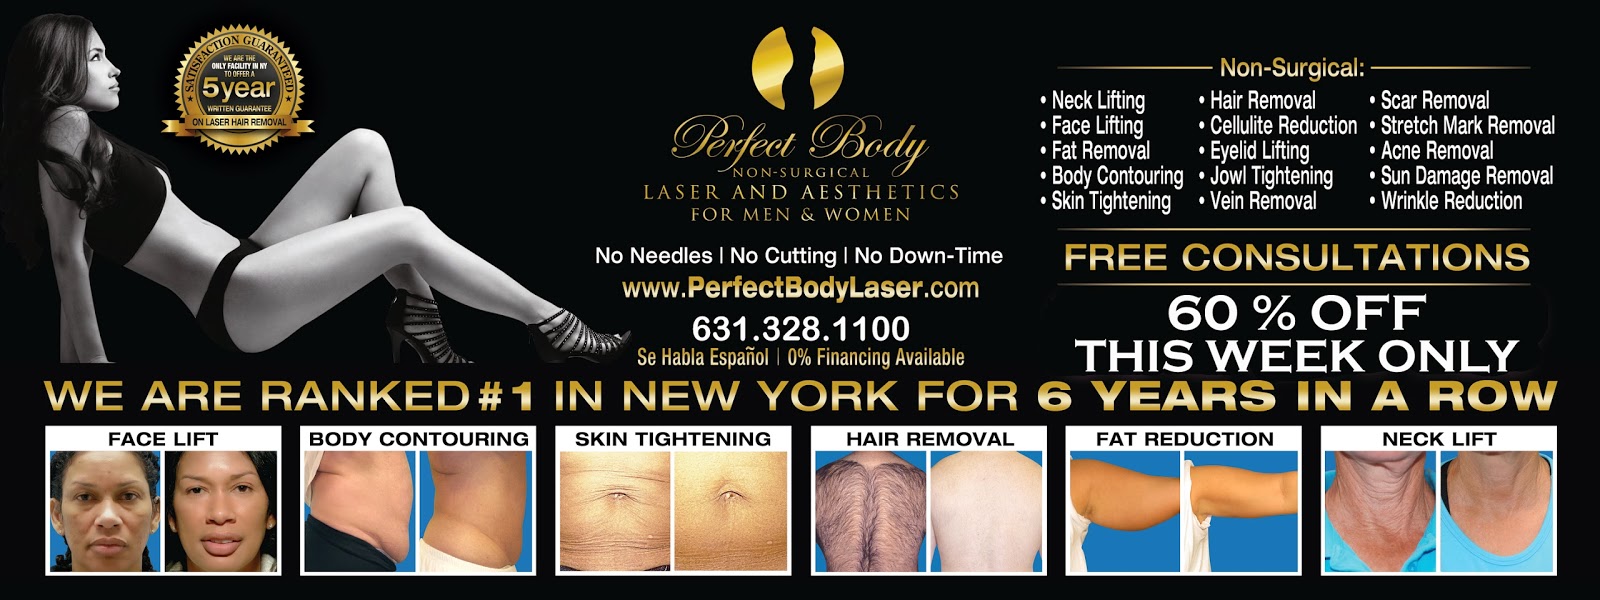 Perfect Body Laser And Aesthetics 60 OFF THIS WEEK ONLY